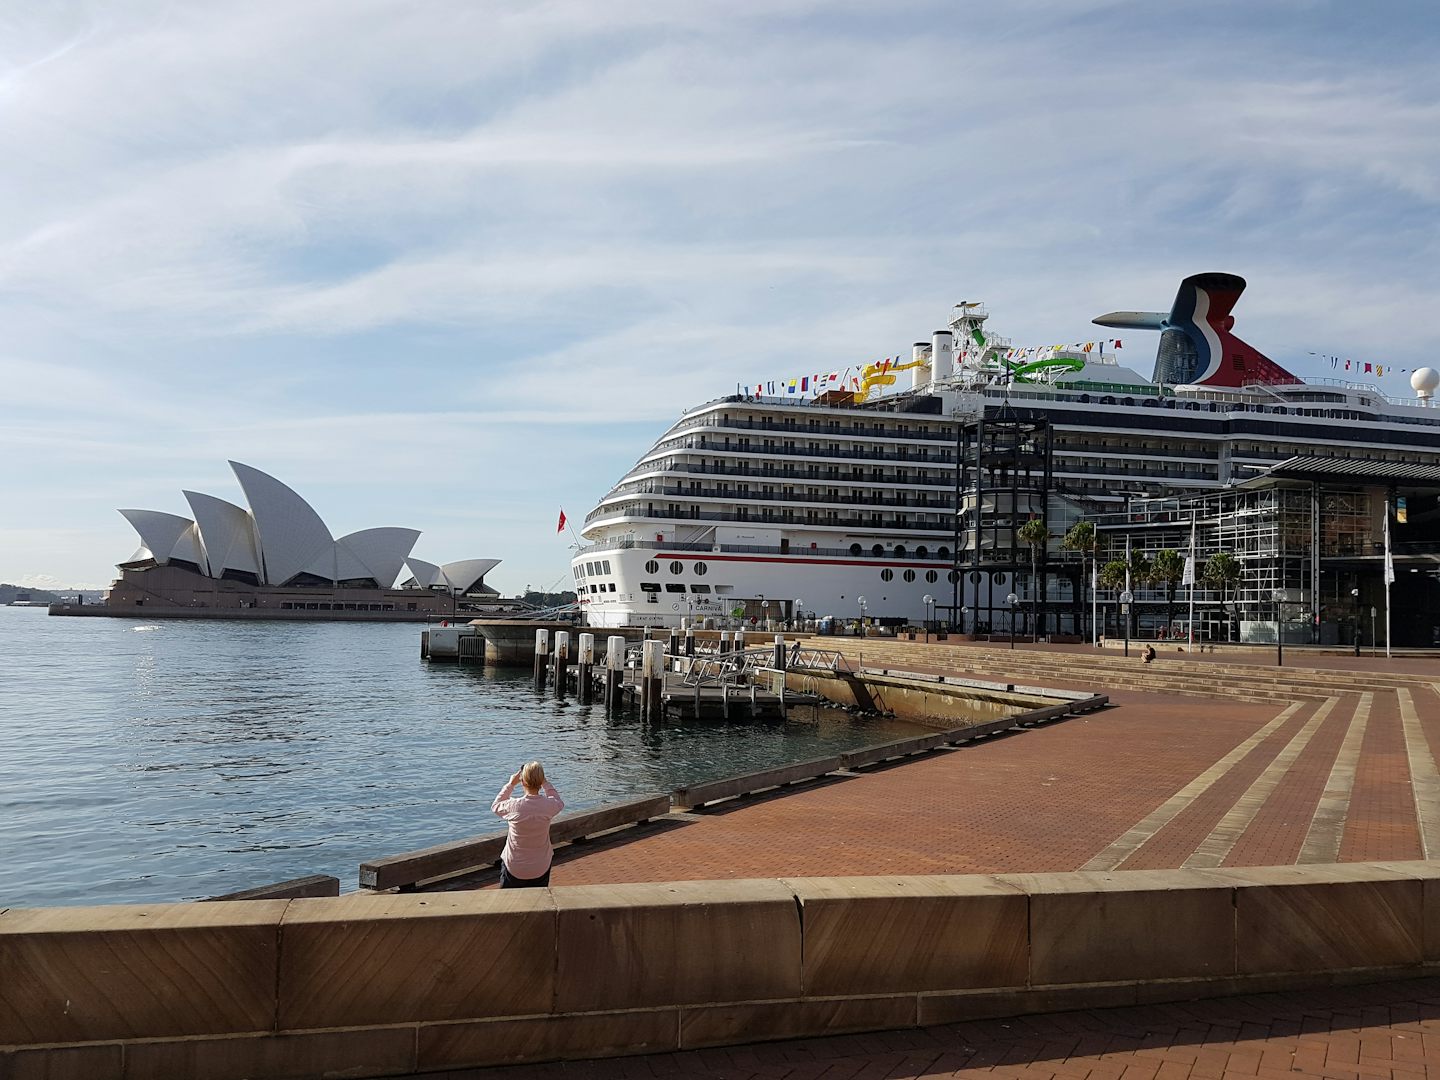 Our first look at the carnival Spirit in Sydney Harbour